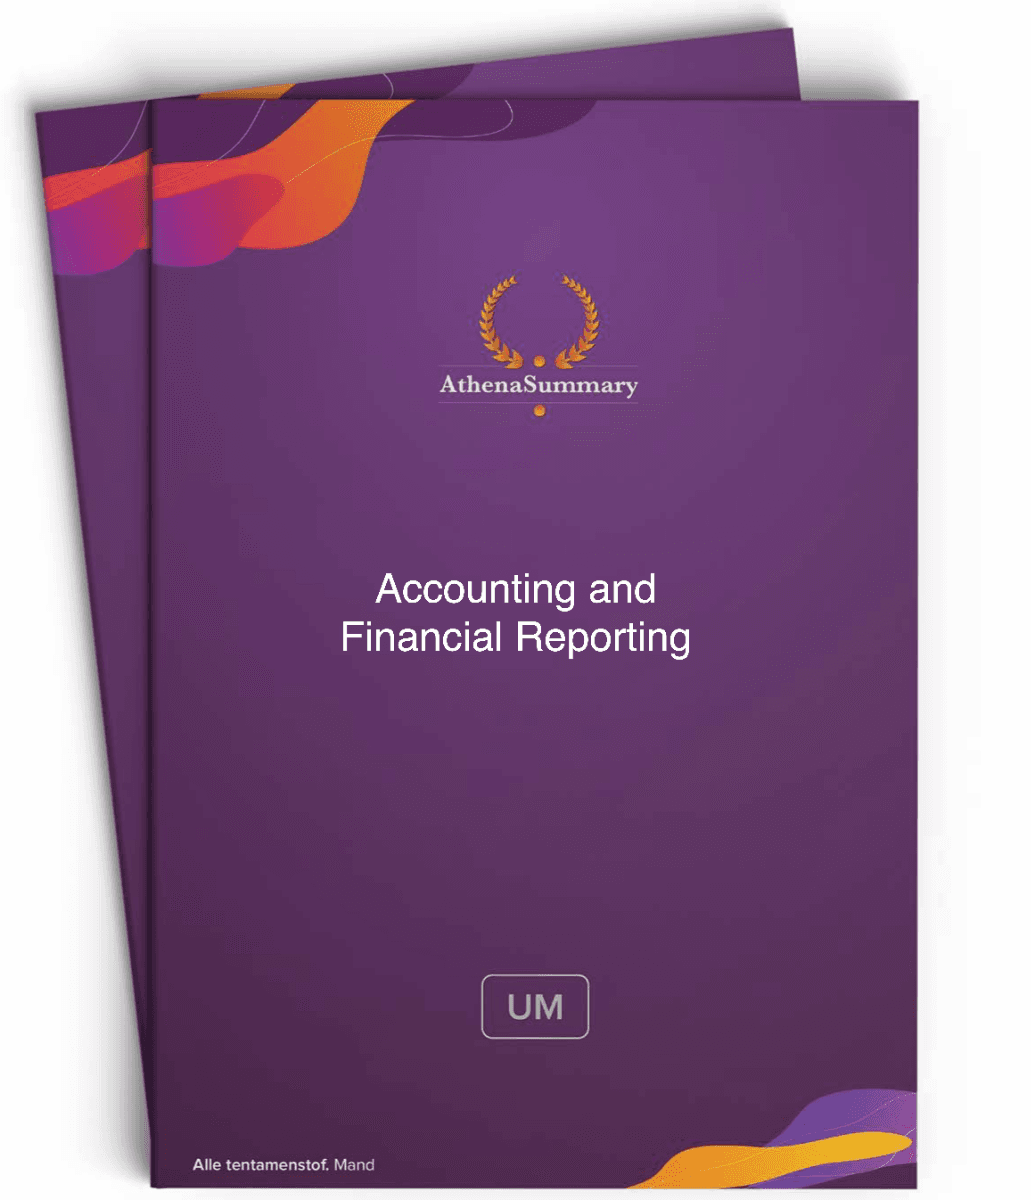 Literature Summary: Accounting and Financial Reporting